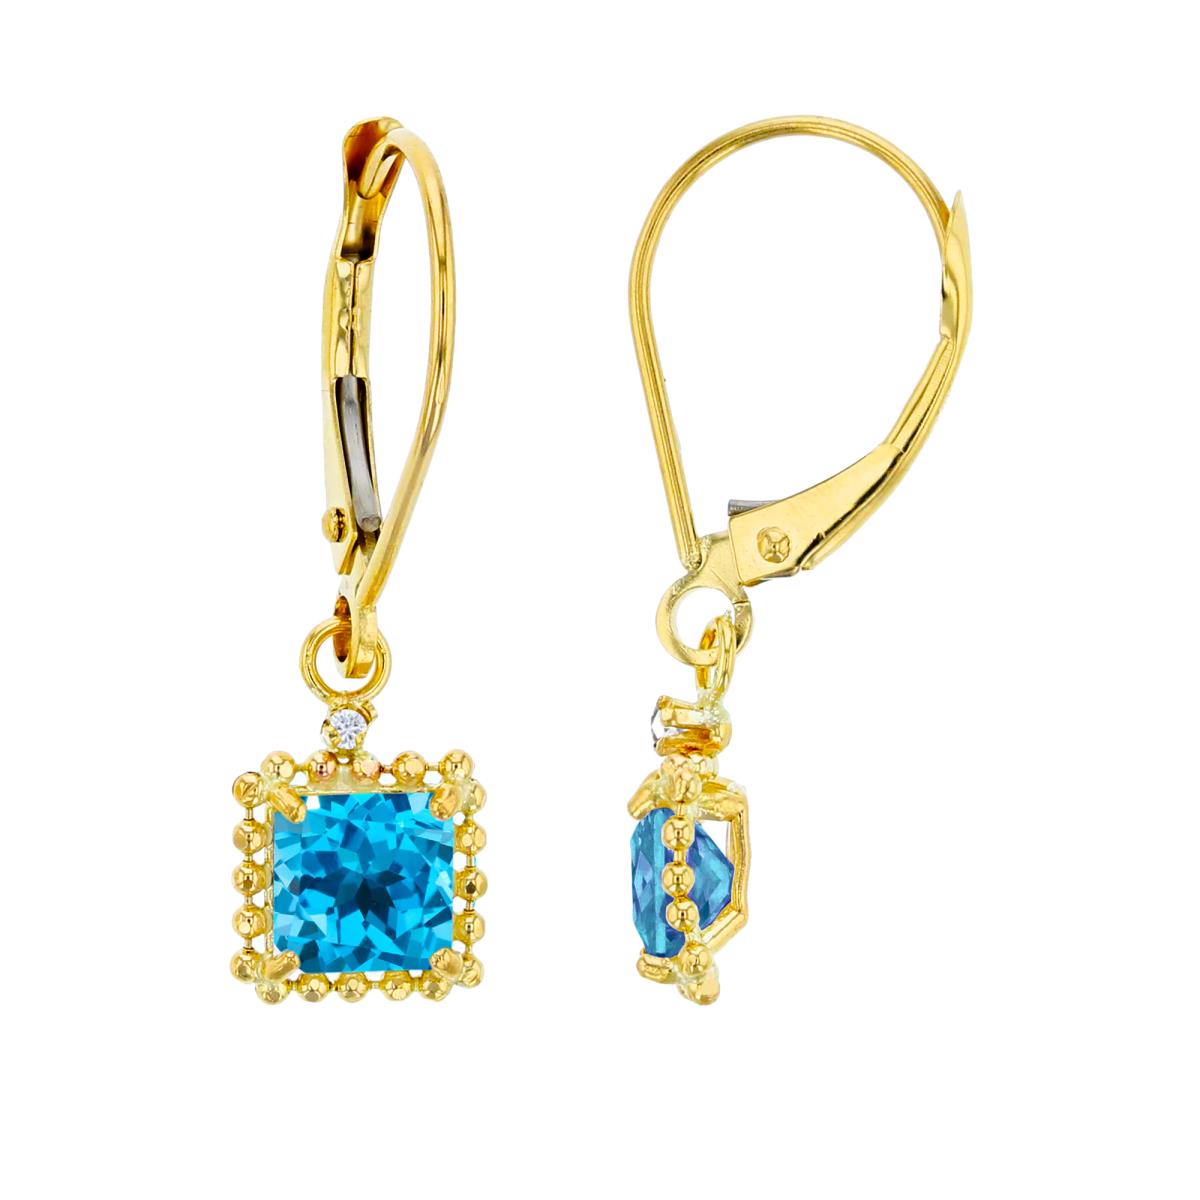 14K Yellow Gold 1.25mm Rd Created White Sapphire & 5mm Sq Swiss Blue Topaz Bead Frame Drop Lever-Back Earring